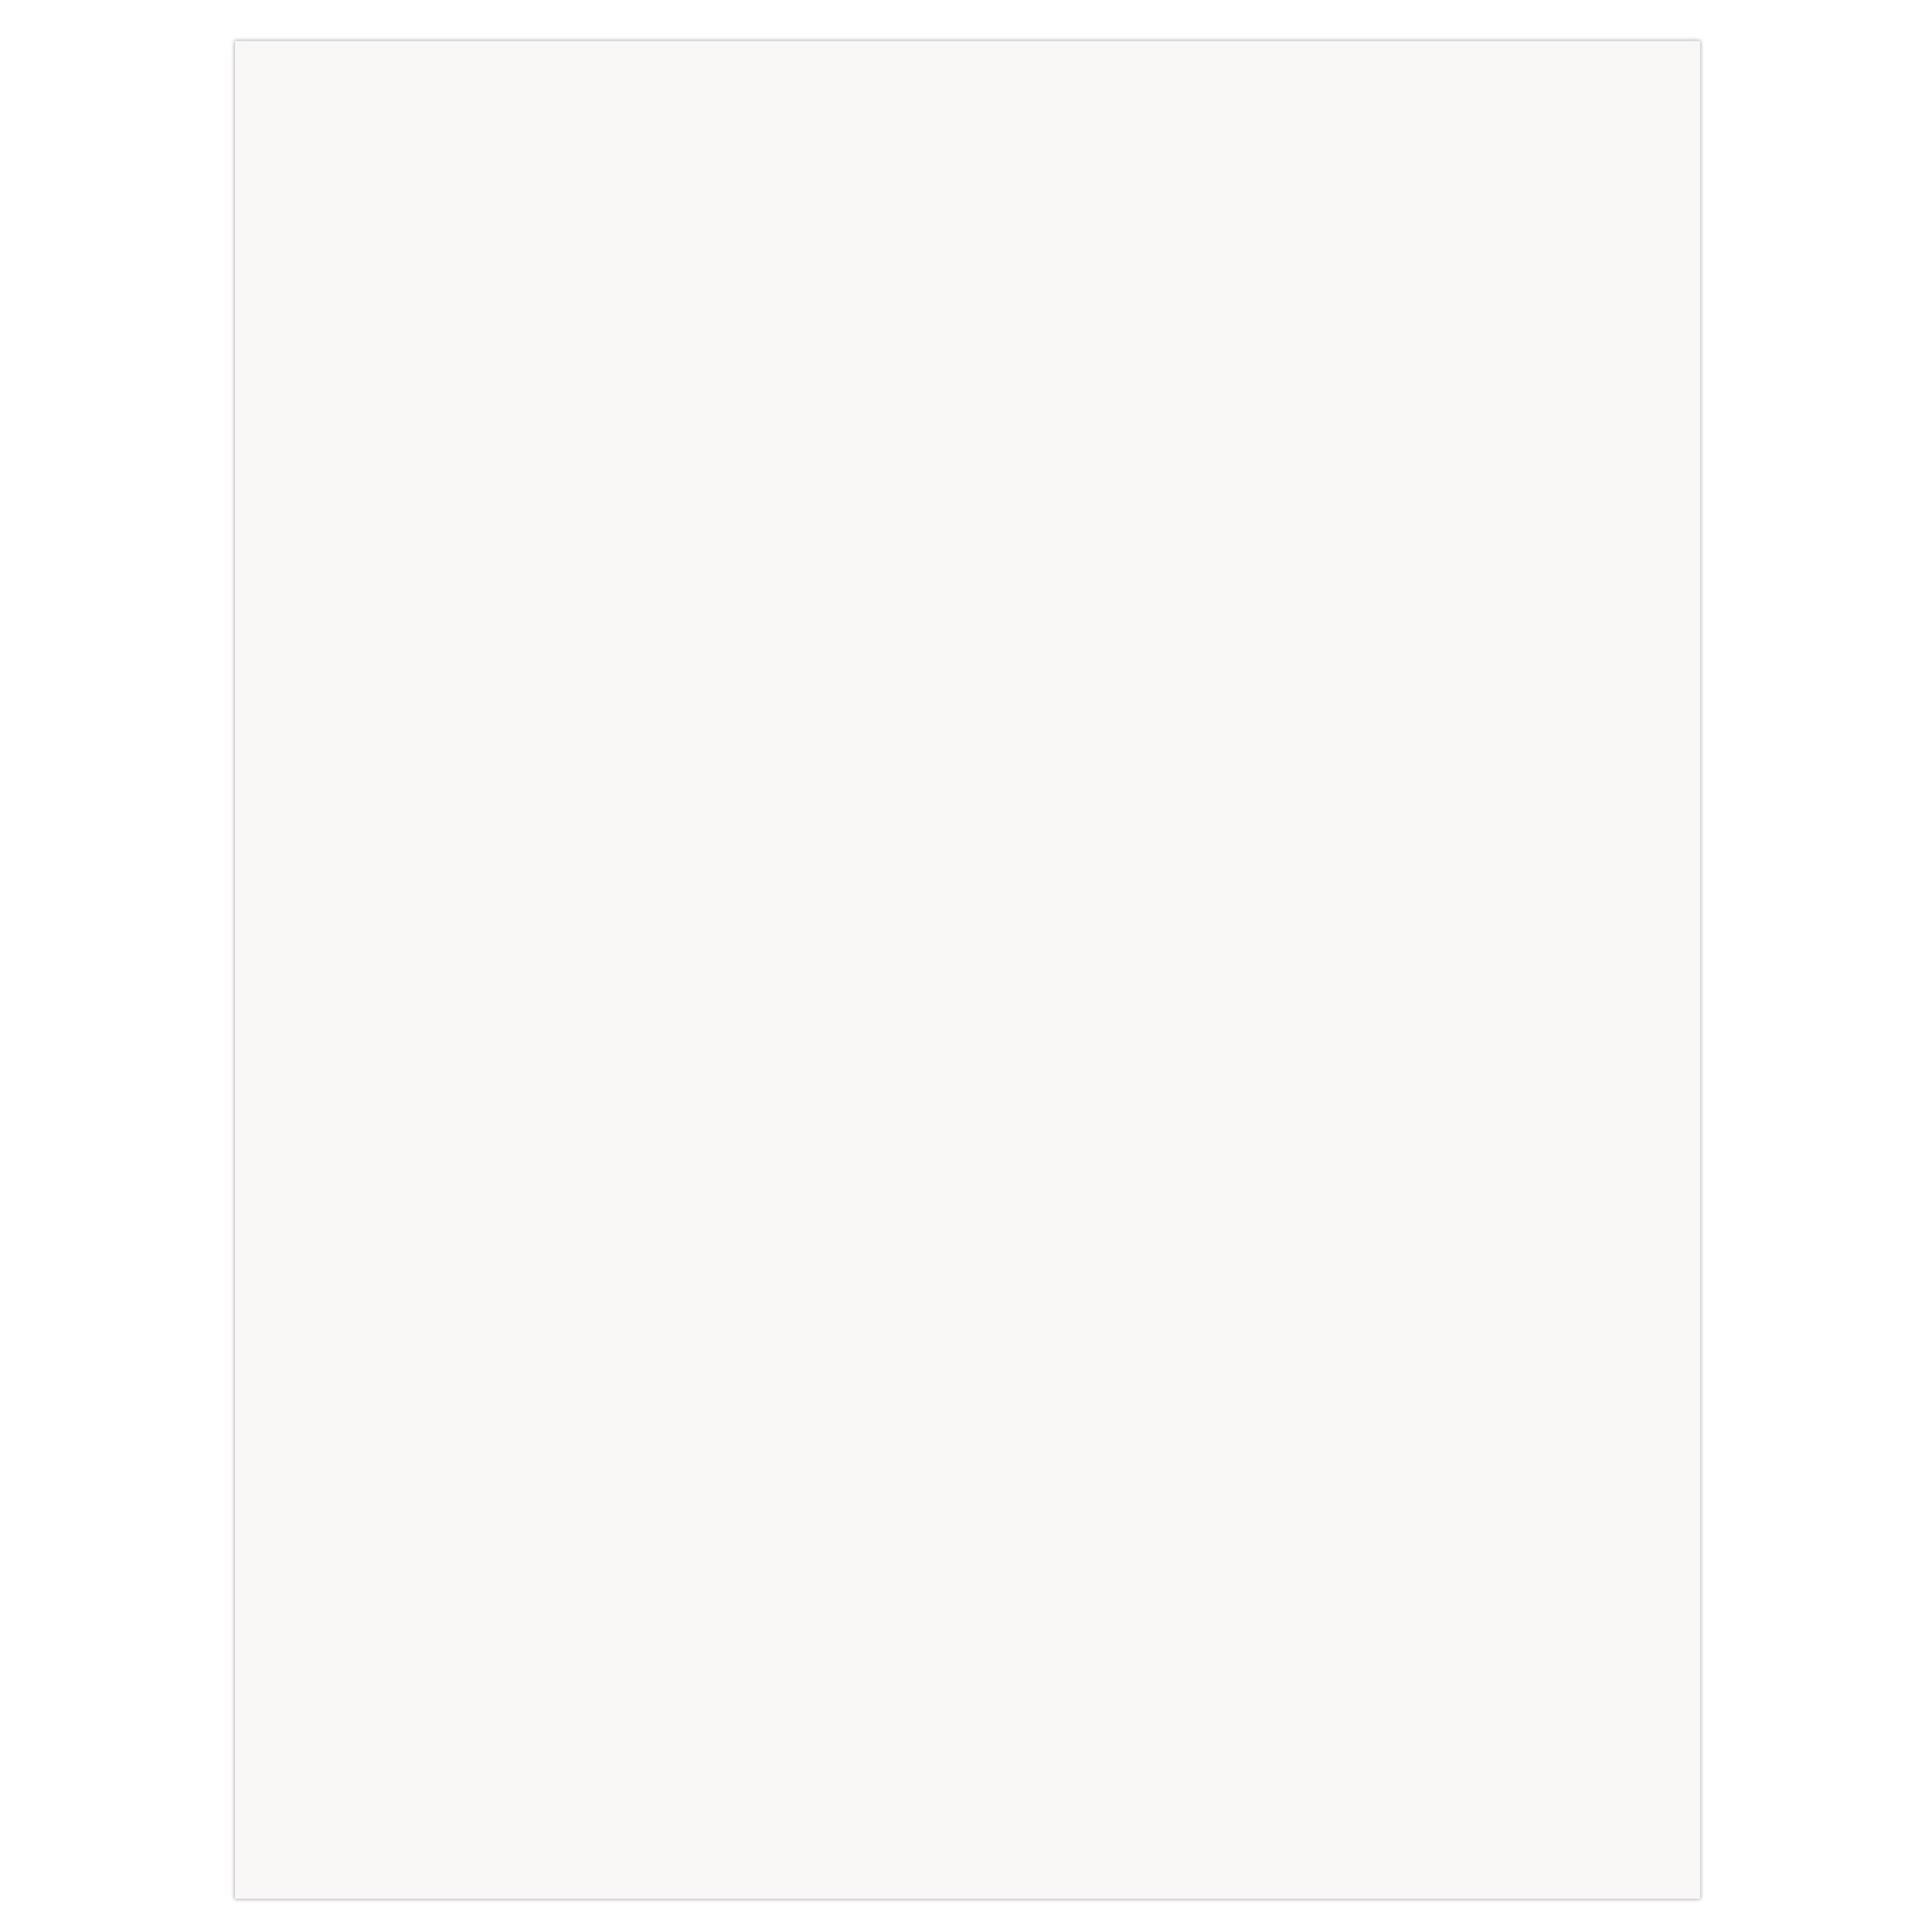 White Poster Board 22 x 28 Pack of 100 by Colorations